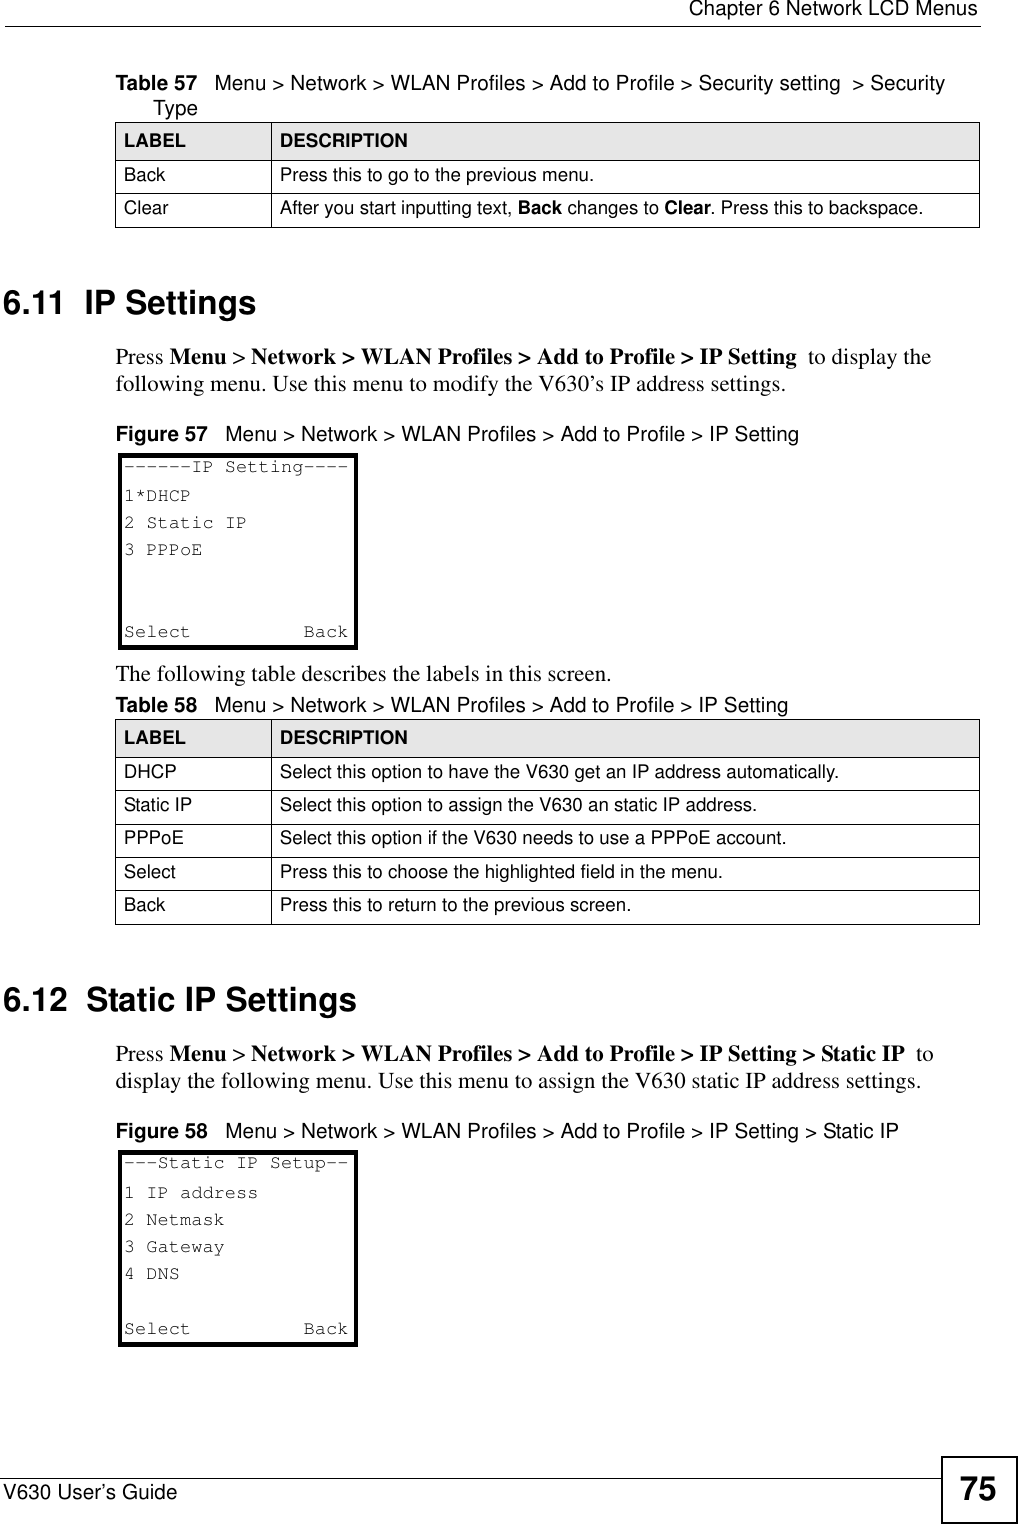  Chapter 6 Network LCD MenusV630 User’s Guide 756.11  IP SettingsPress Menu &gt; Network &gt; WLAN Profiles &gt; Add to Profile &gt; IP Setting  to display the following menu. Use this menu to modify the V630’s IP address settings.Figure 57   Menu &gt; Network &gt; WLAN Profiles &gt; Add to Profile &gt; IP SettingThe following table describes the labels in this screen.6.12  Static IP SettingsPress Menu &gt; Network &gt; WLAN Profiles &gt; Add to Profile &gt; IP Setting &gt; Static IP  to display the following menu. Use this menu to assign the V630 static IP address settings.Figure 58   Menu &gt; Network &gt; WLAN Profiles &gt; Add to Profile &gt; IP Setting &gt; Static IPBack Press this to go to the previous menu. Clear After you start inputting text, Back changes to Clear. Press this to backspace.Table 57   Menu &gt; Network &gt; WLAN Profiles &gt; Add to Profile &gt; Security setting  &gt; Security TypeLABEL DESCRIPTIONTable 58   Menu &gt; Network &gt; WLAN Profiles &gt; Add to Profile &gt; IP SettingLABEL DESCRIPTIONDHCP Select this option to have the V630 get an IP address automatically. Static IP Select this option to assign the V630 an static IP address.PPPoE Select this option if the V630 needs to use a PPPoE account.Select Press this to choose the highlighted field in the menu.Back Press this to return to the previous screen.------IP Setting----1*DHCP2 Static IP3 PPPoESelect   Back---Static IP Setup--1 IP address2 Netmask3 Gateway4 DNSSelect   Back